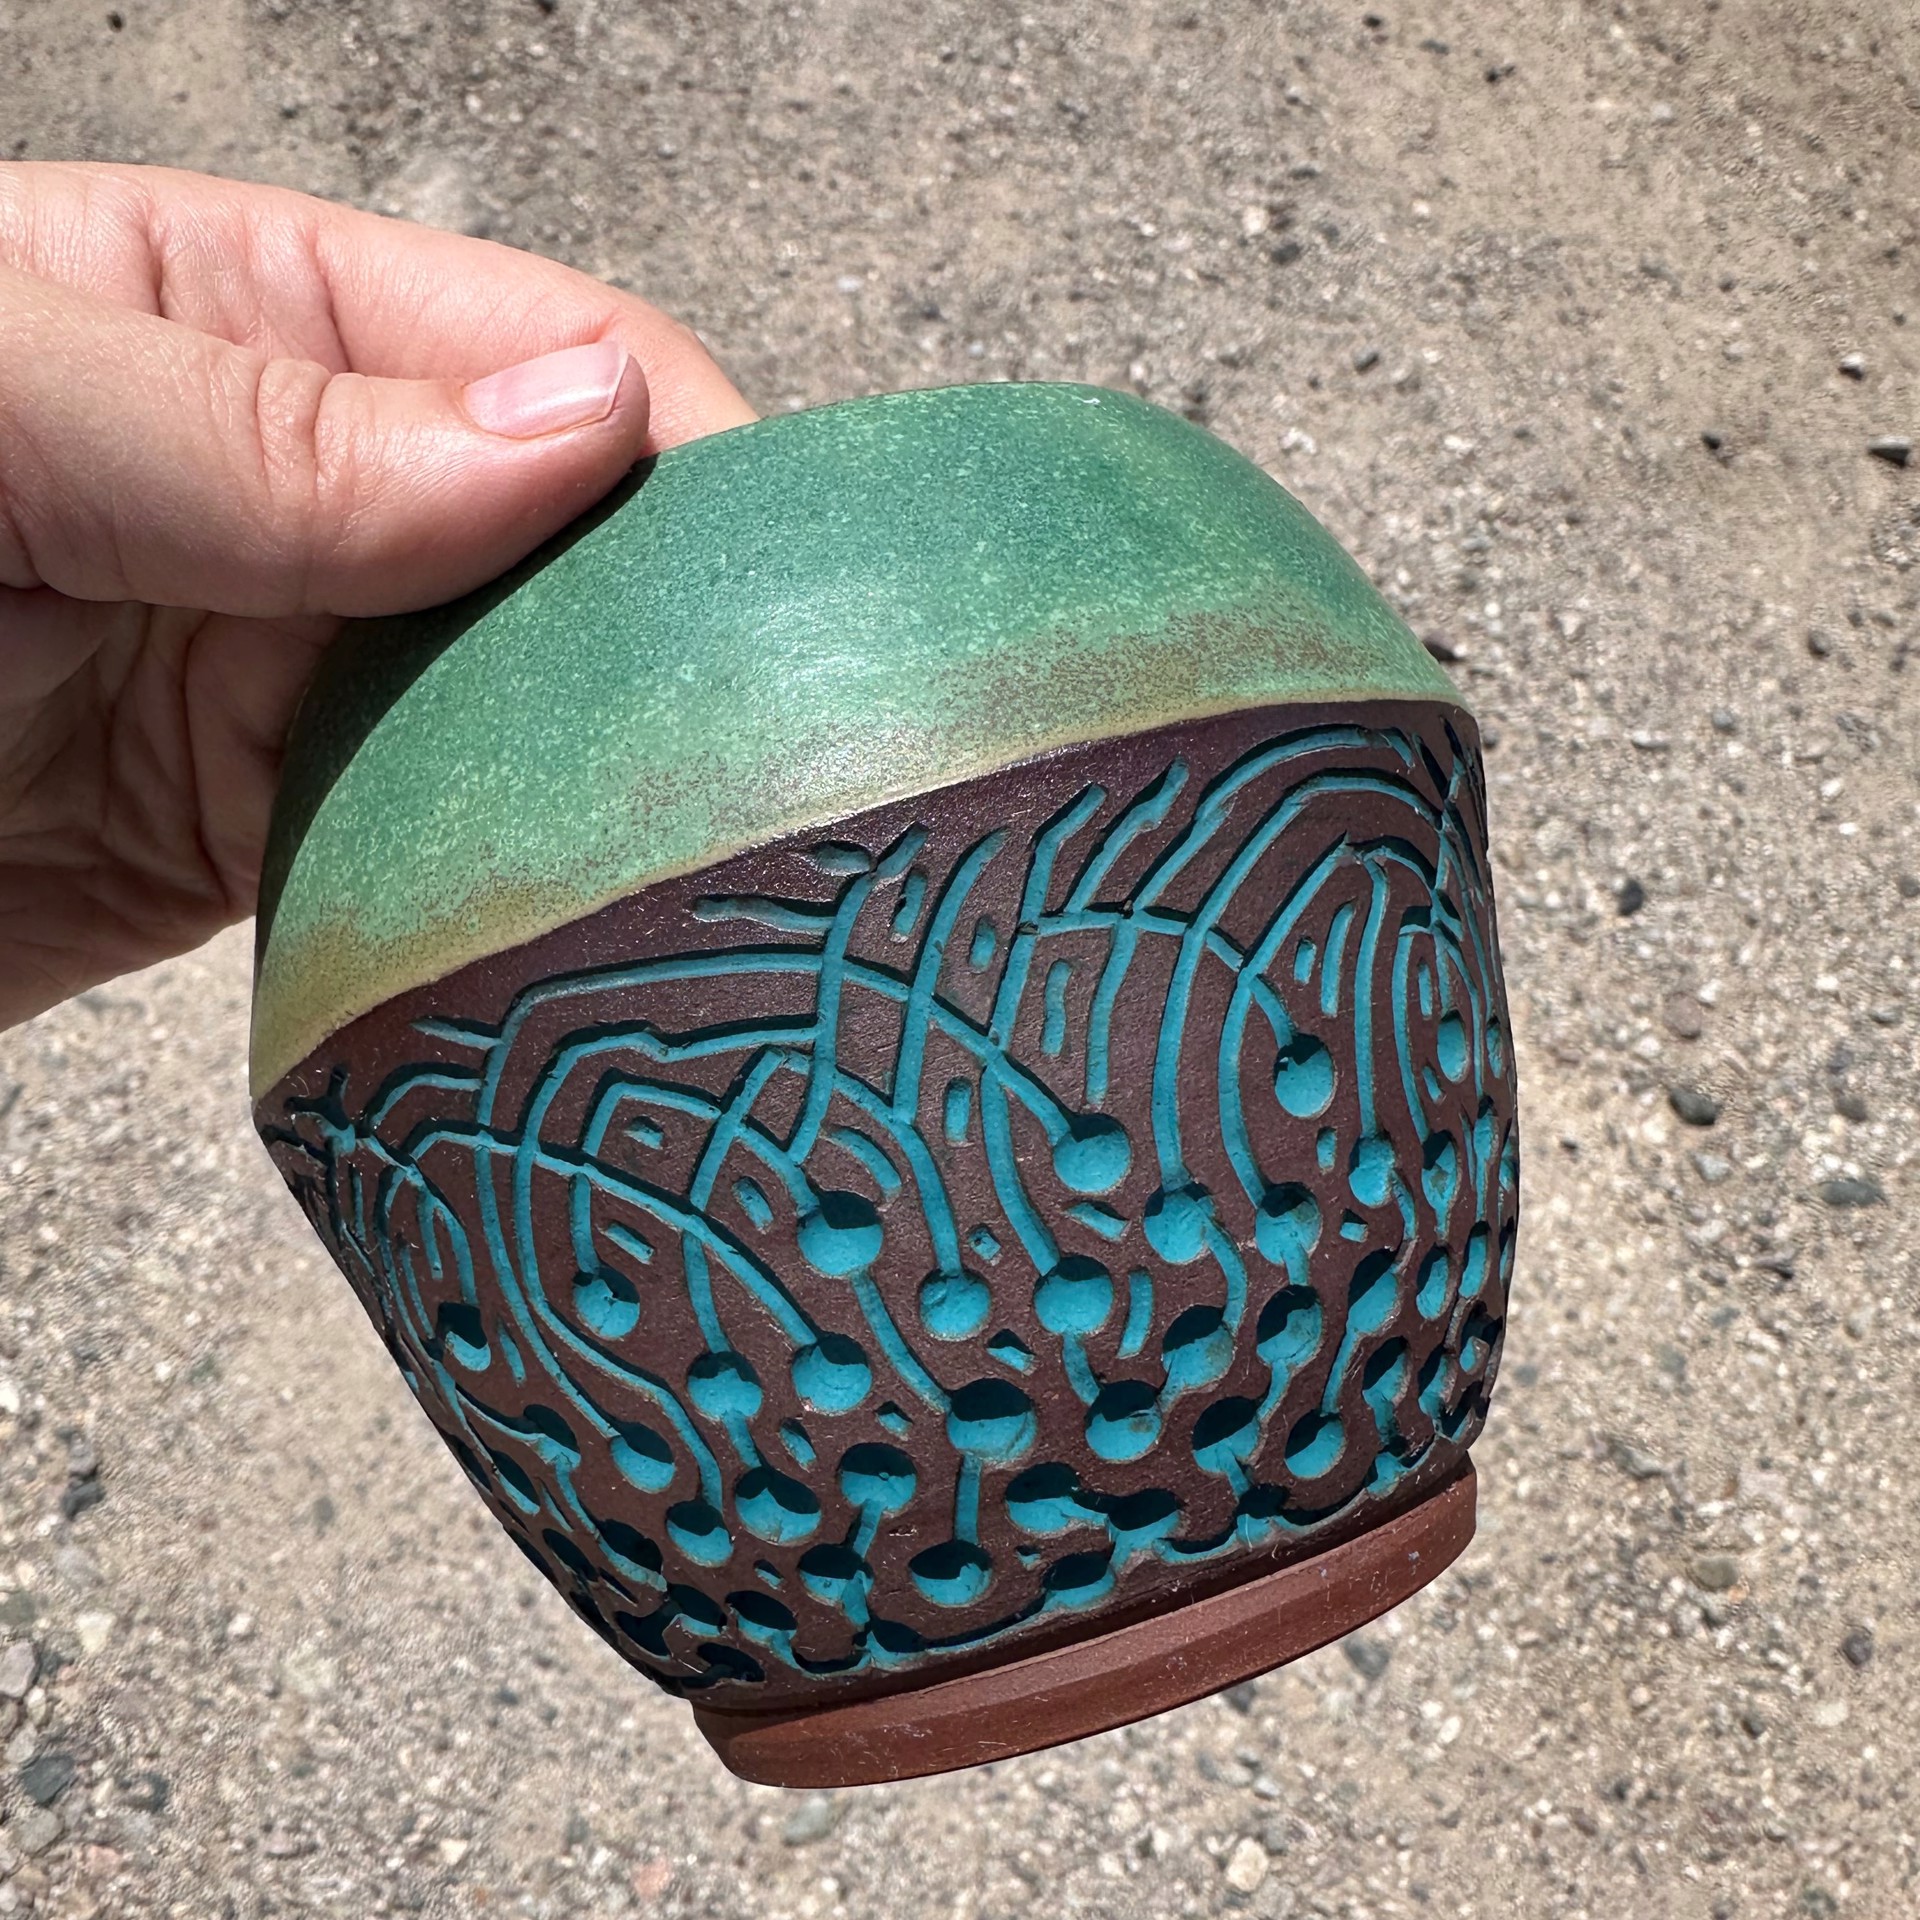 Red clay vase with green inlay and turquoise glaze  NOT FOOD SAFE by James Baxter